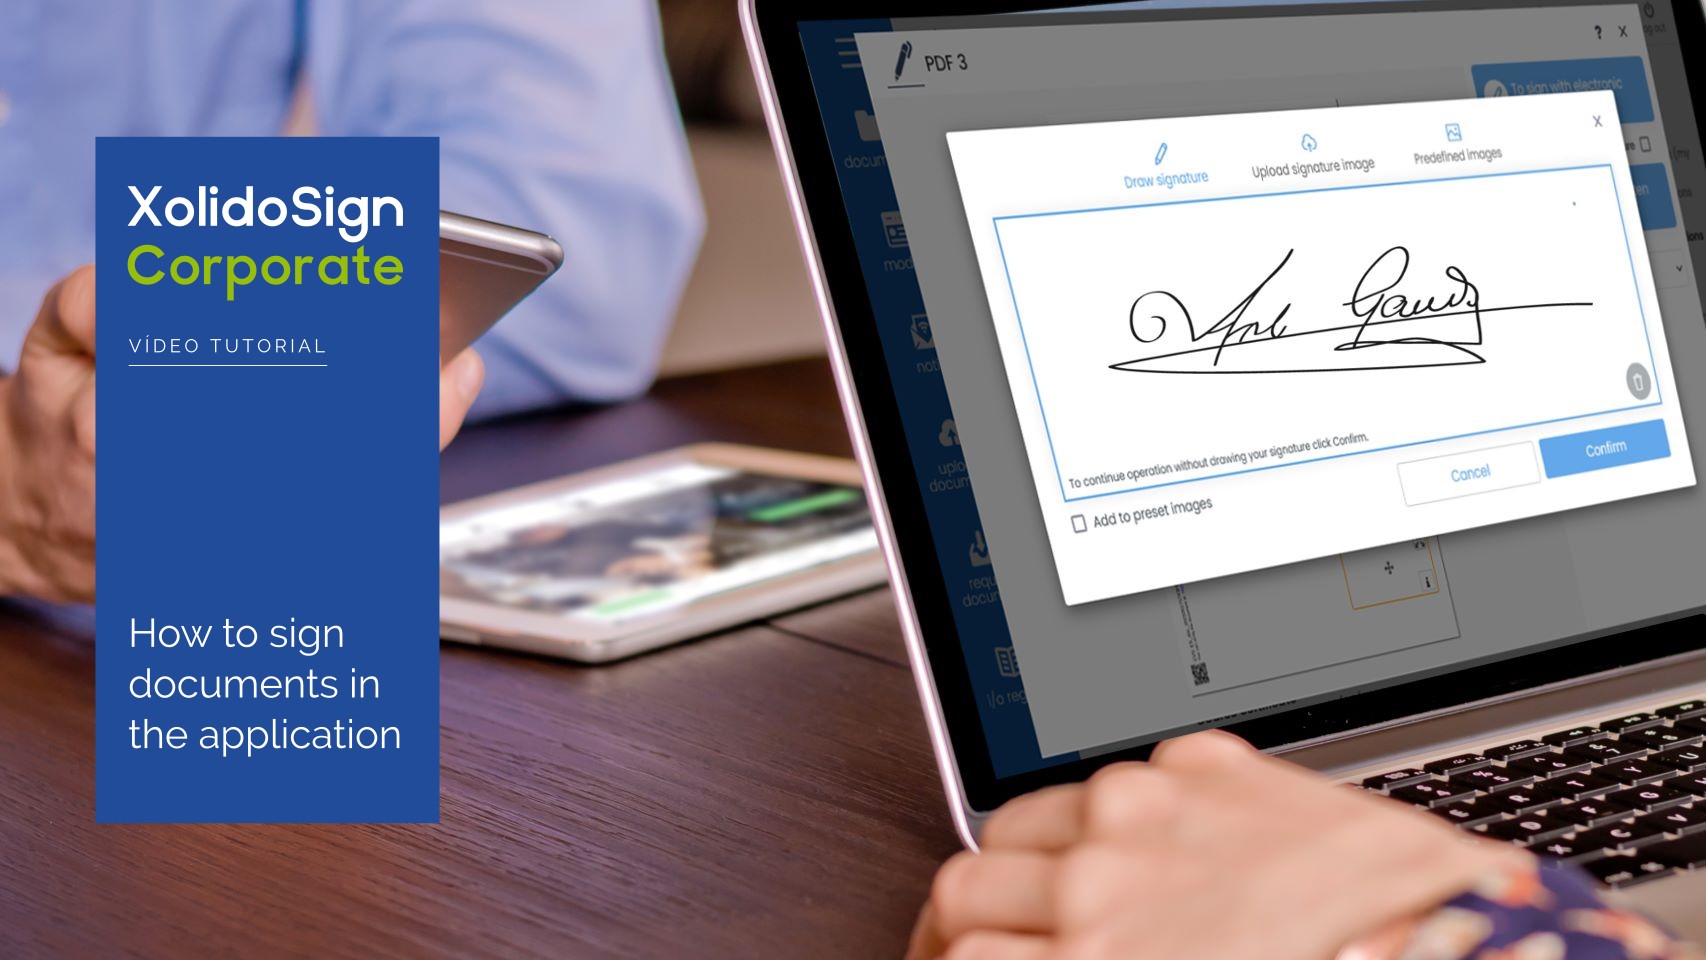 How to sign documents in the application